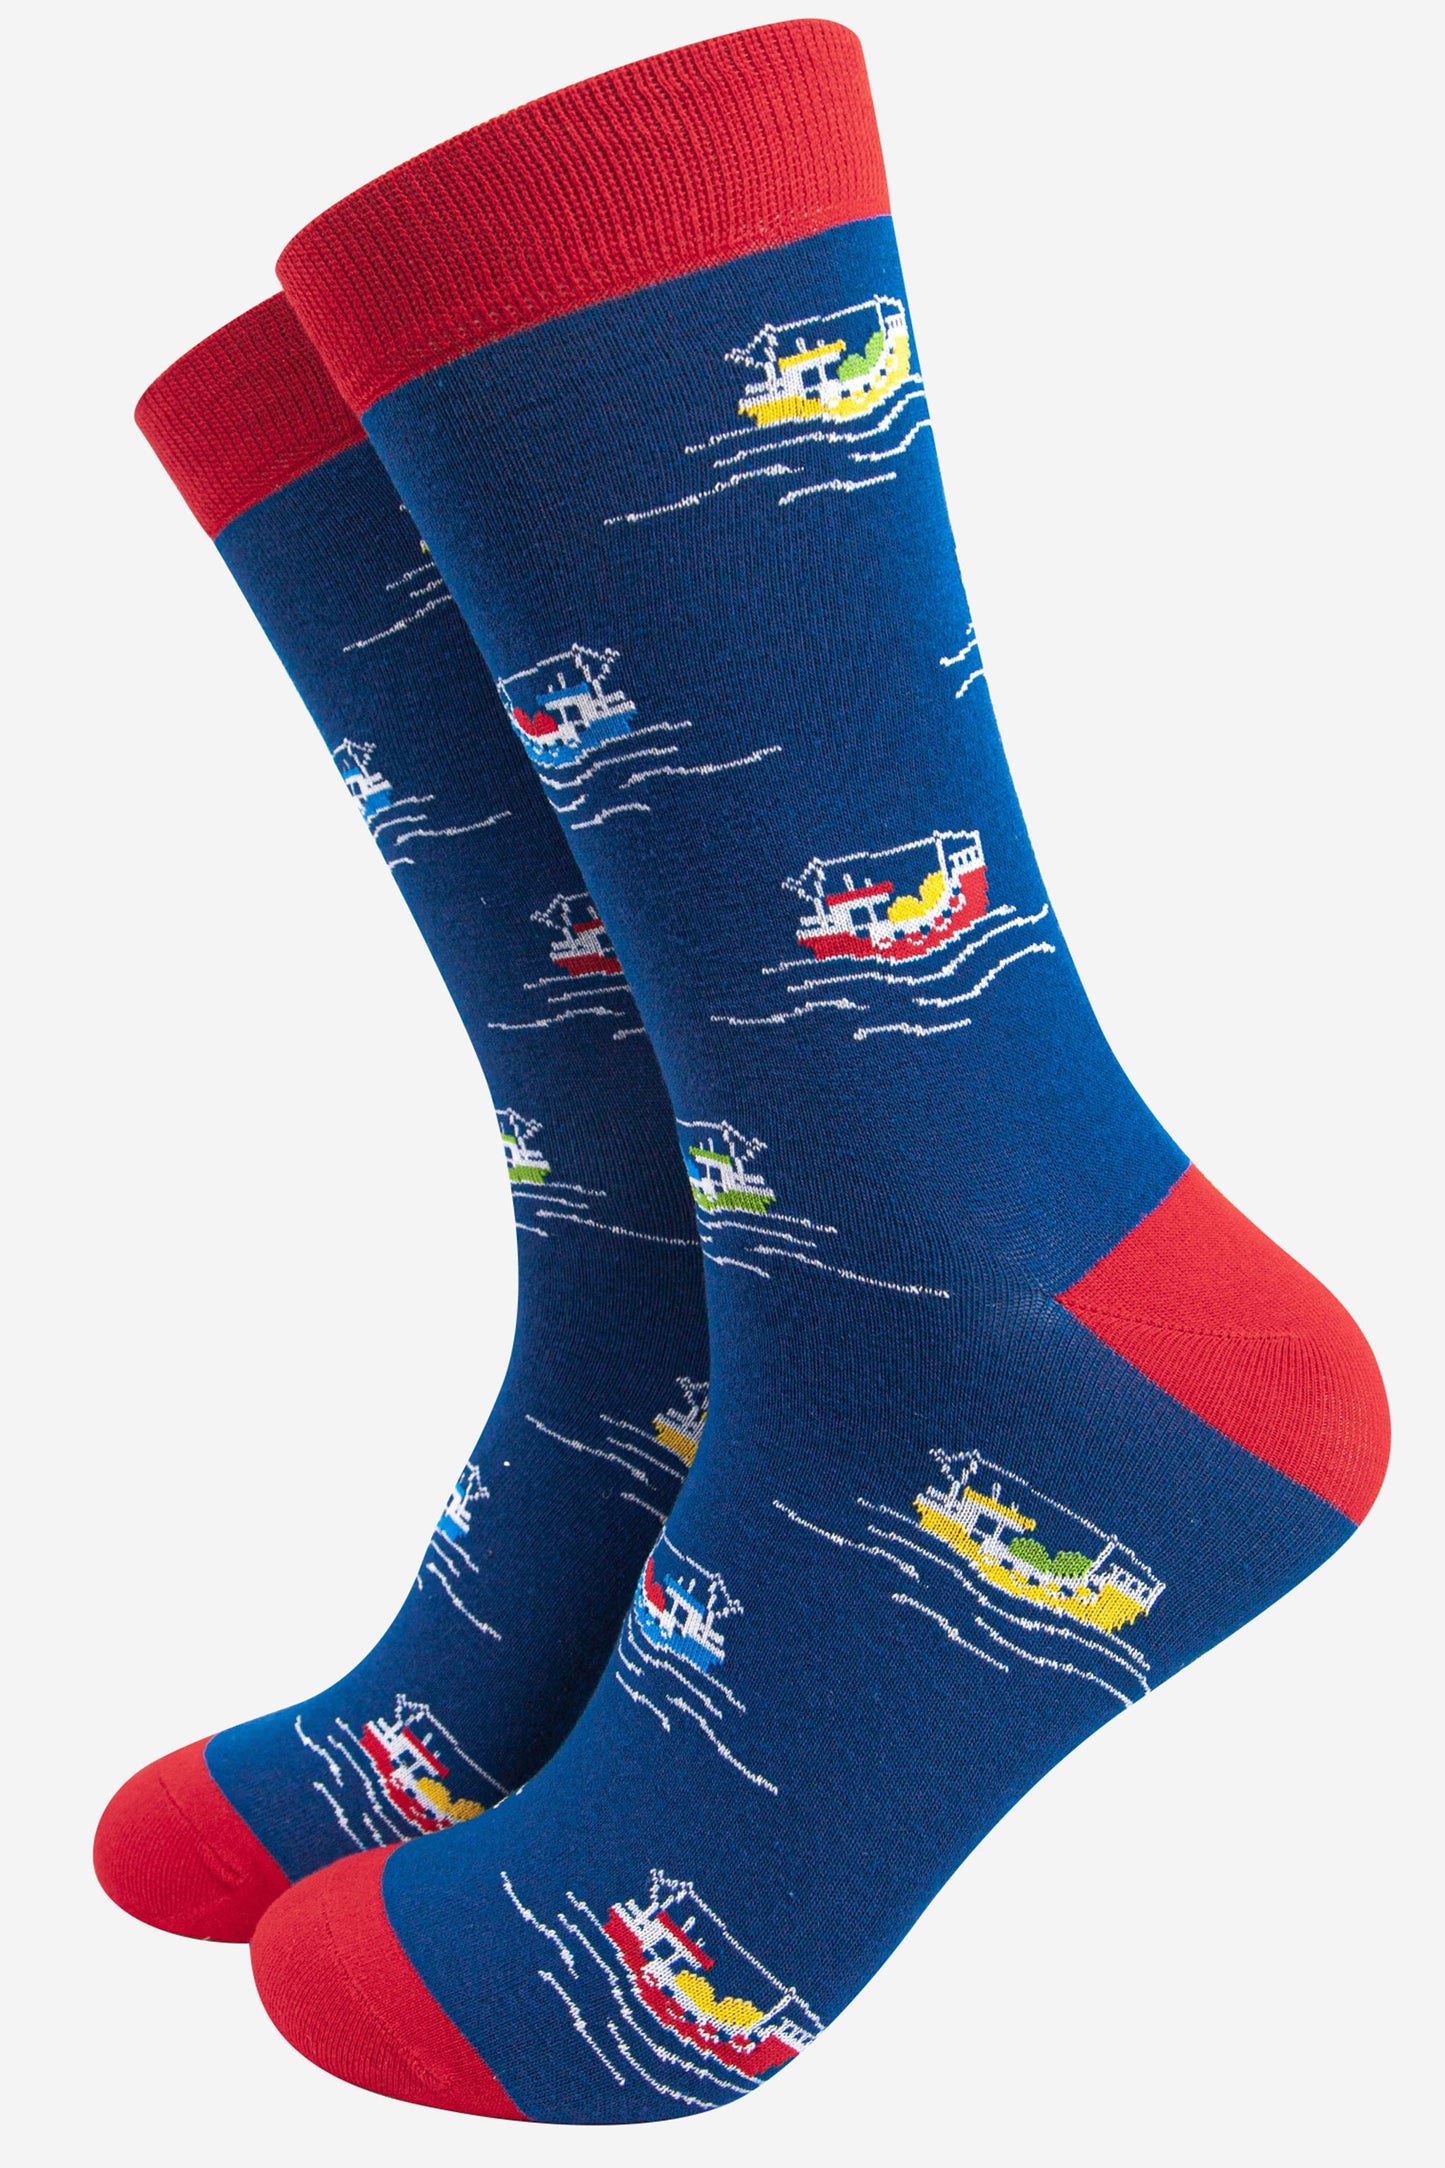 blue bamboo socks with red heel, toe and cuff with an all over pattern of colourful fishing boats